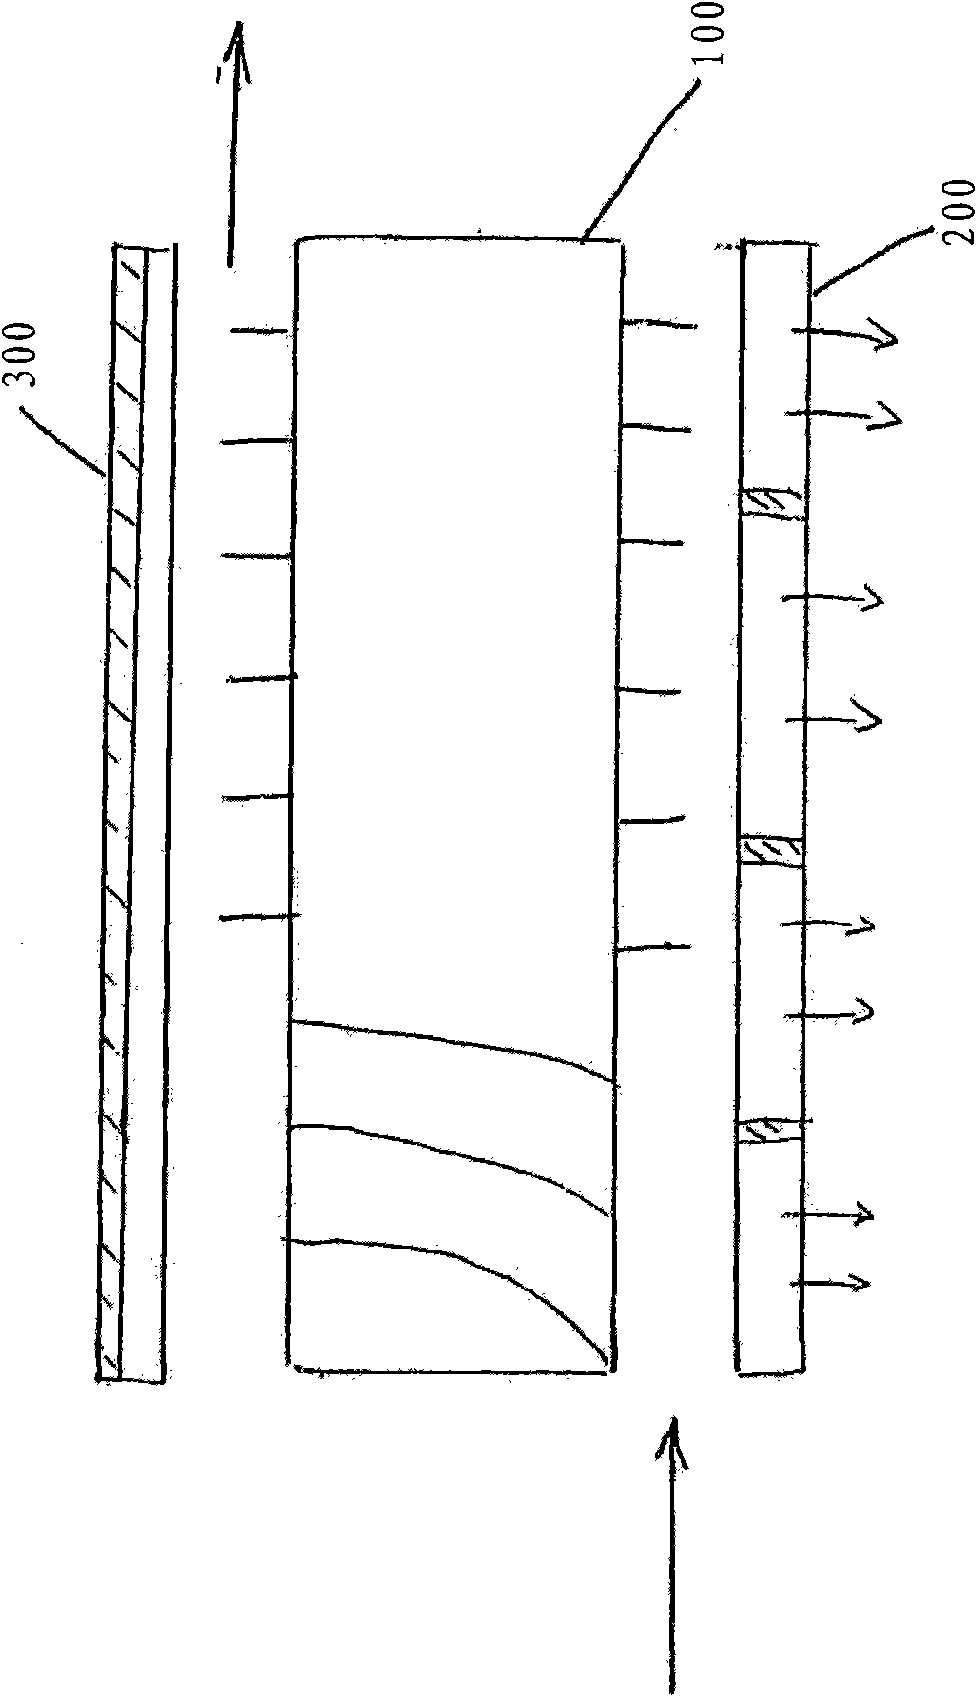 Threshing separation cylinder, threshing separation device and combine harvester